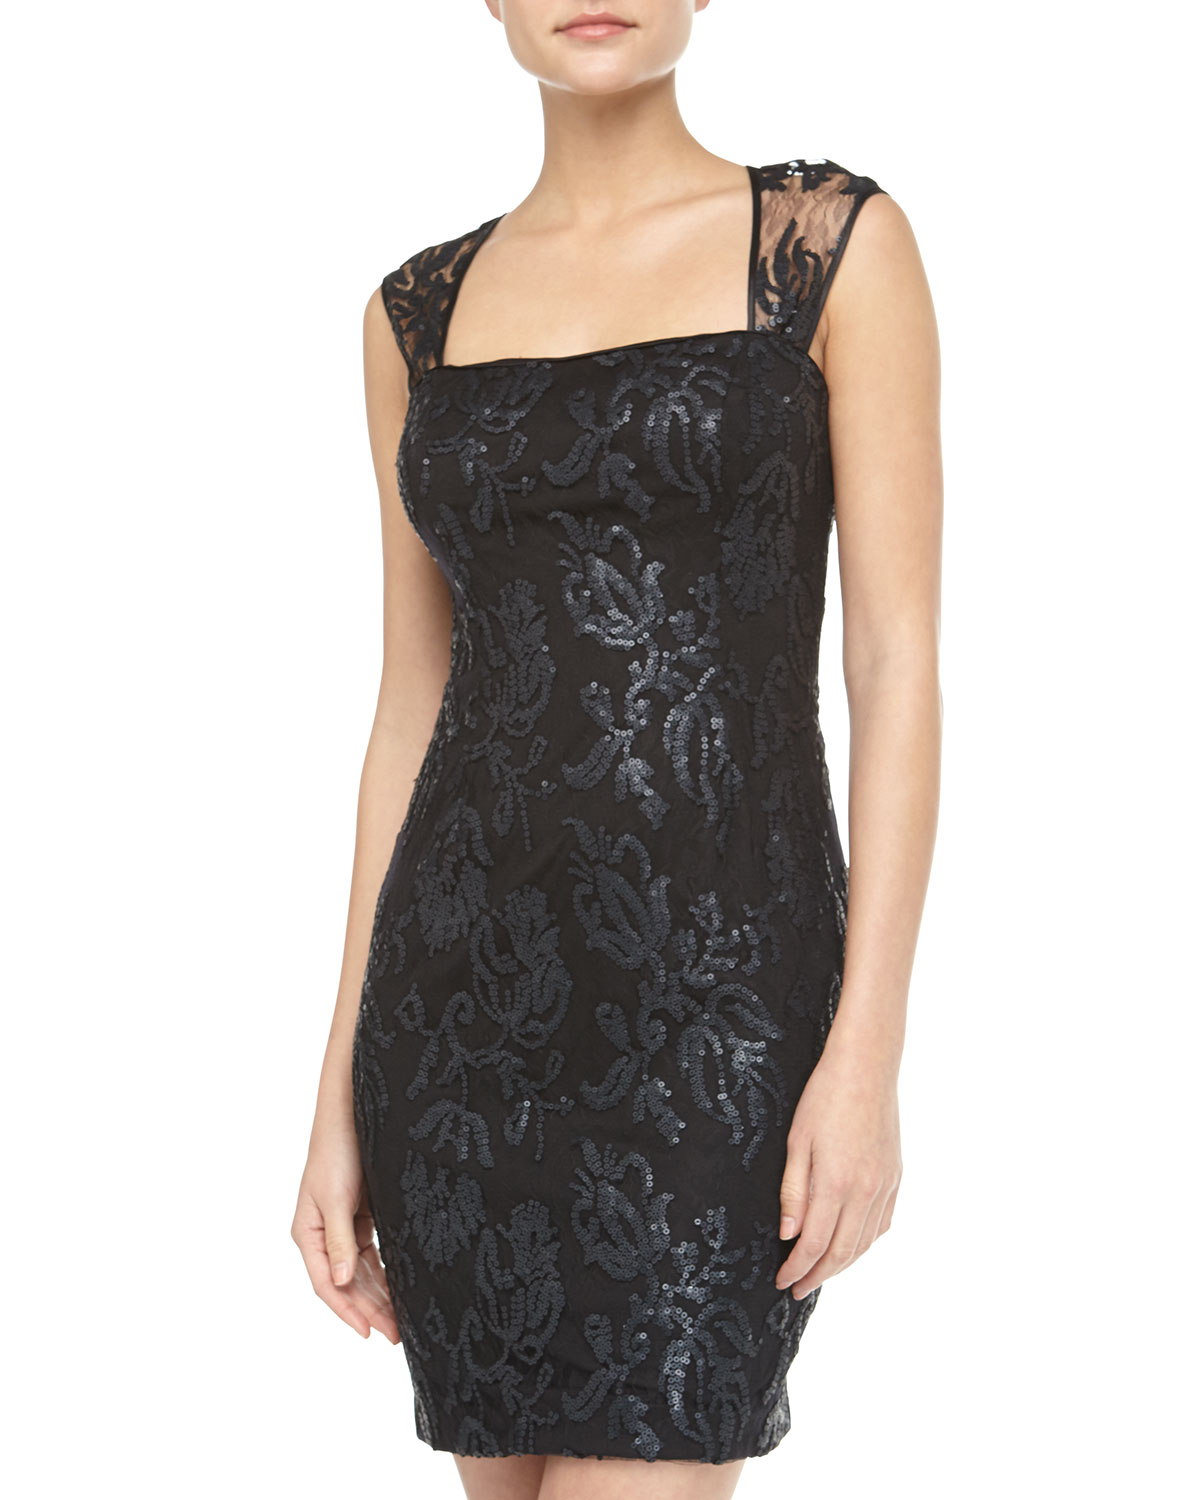 Adrianna Papell Lace Dress See Sequin Dresses See Black Lace Cocktail ...